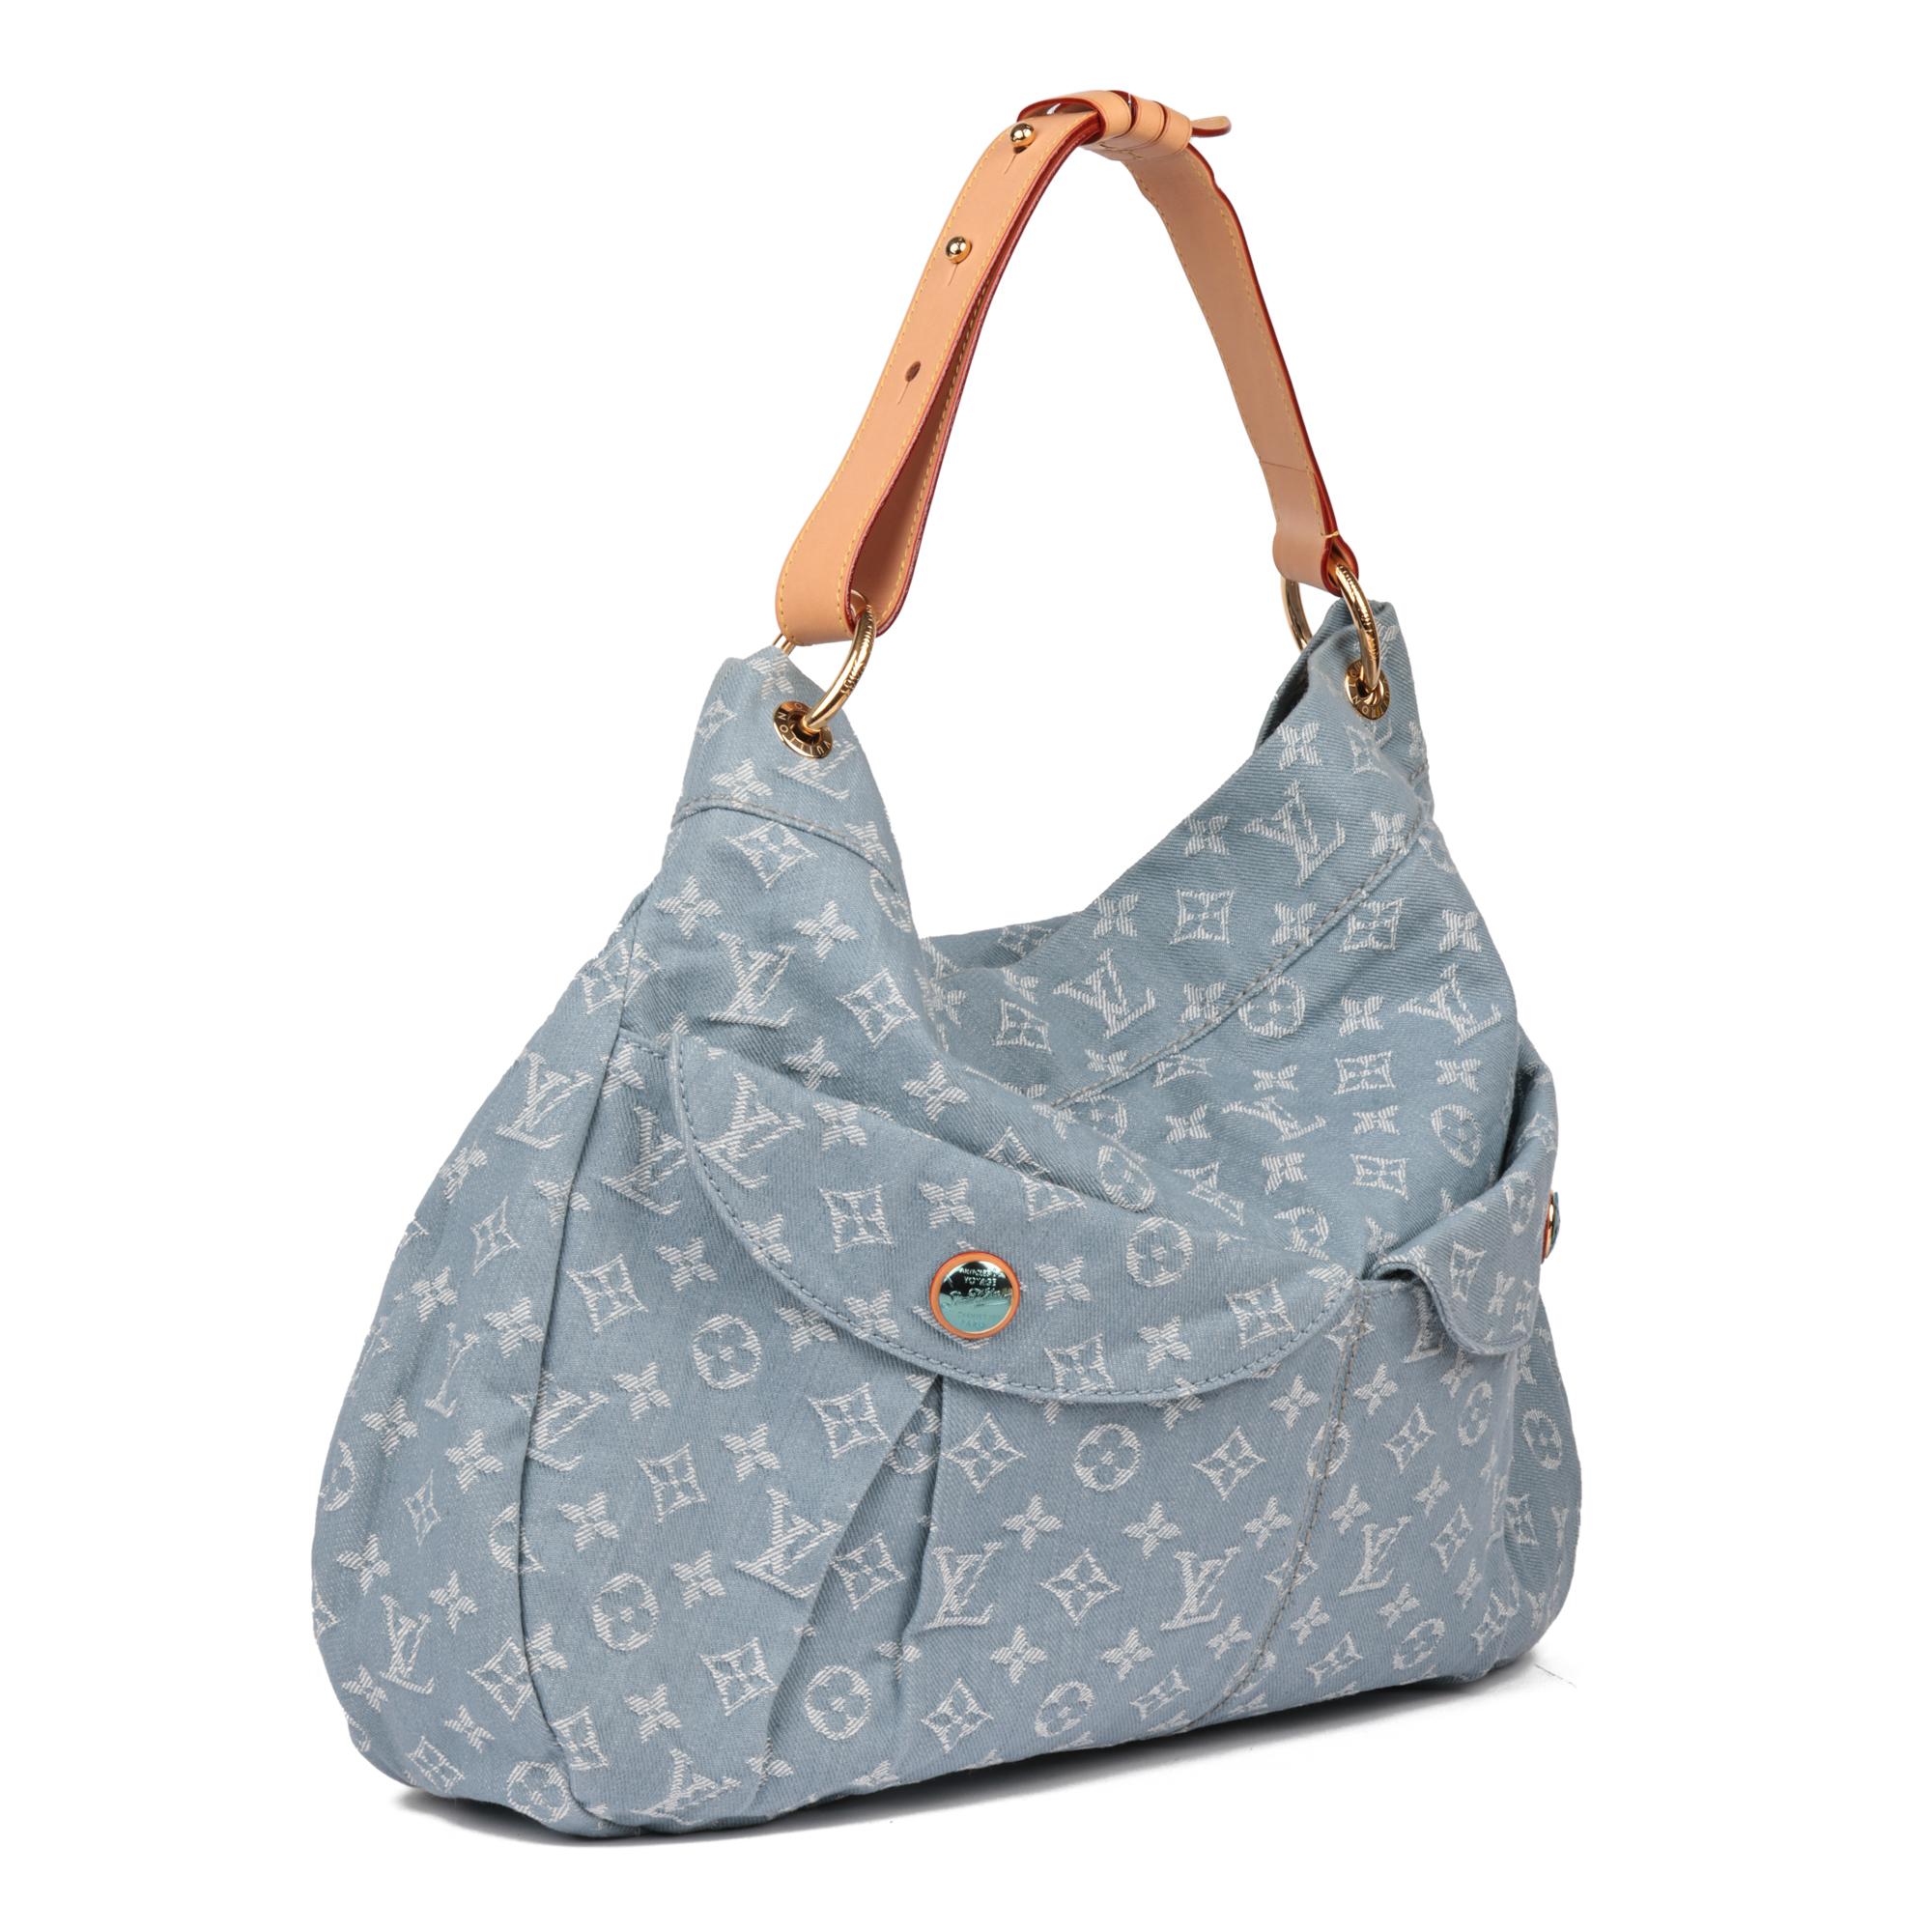 LOUIS VUITTON
Light Blue Monogram Denim & Vachetta Leather Daily GM

Xupes Reference: HB5141
Serial Number: FO1197
Age (Circa): 2017
Accompanied By: Louis Vuitton Dust Bag, Care Booklet 
Authenticity Details: Date Stamp (Made in Italy)
Gender: